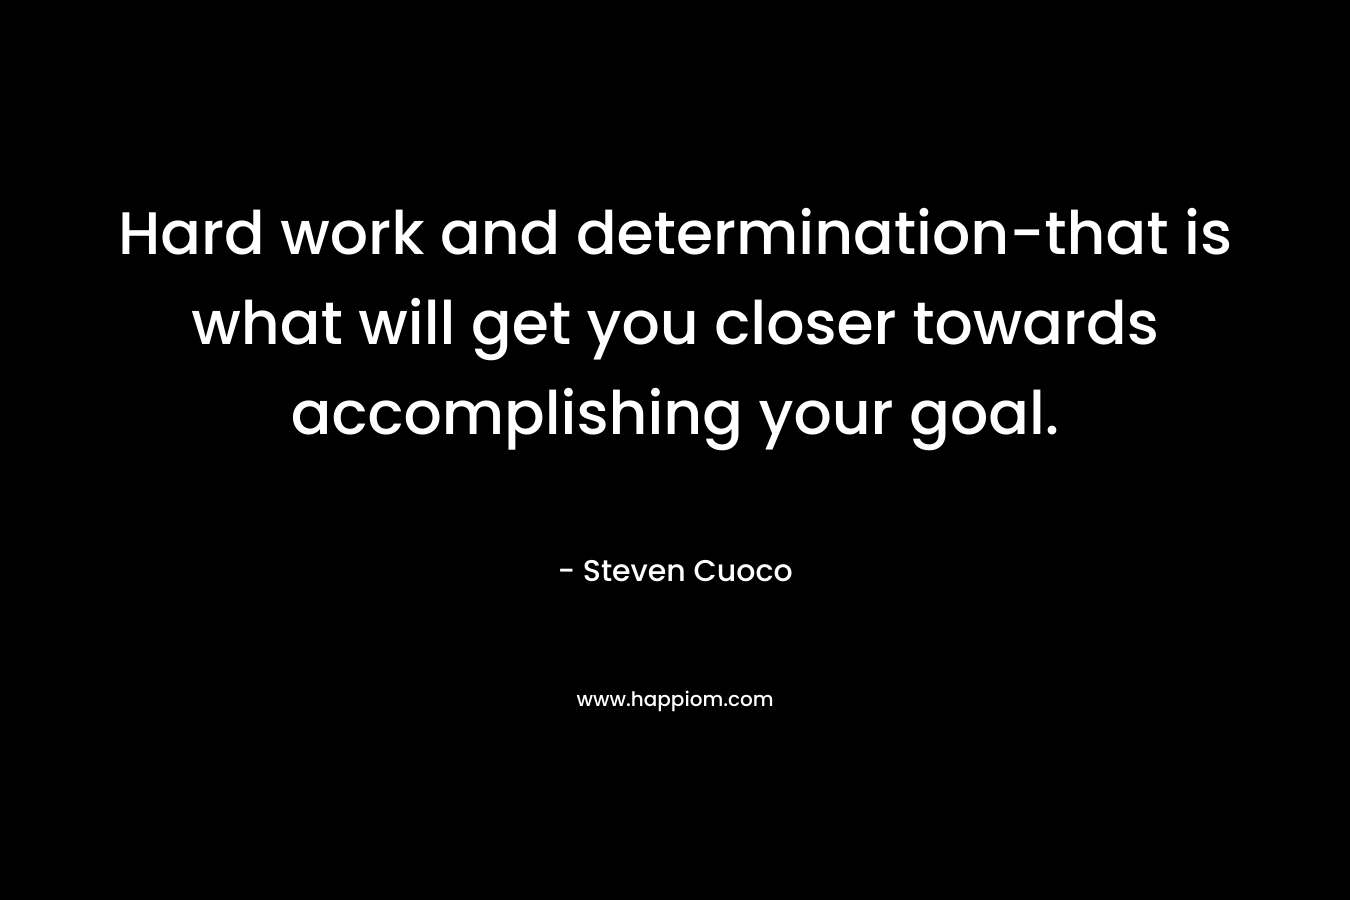 Hard work and determination-that is what will get you closer towards accomplishing your goal. – Steven Cuoco